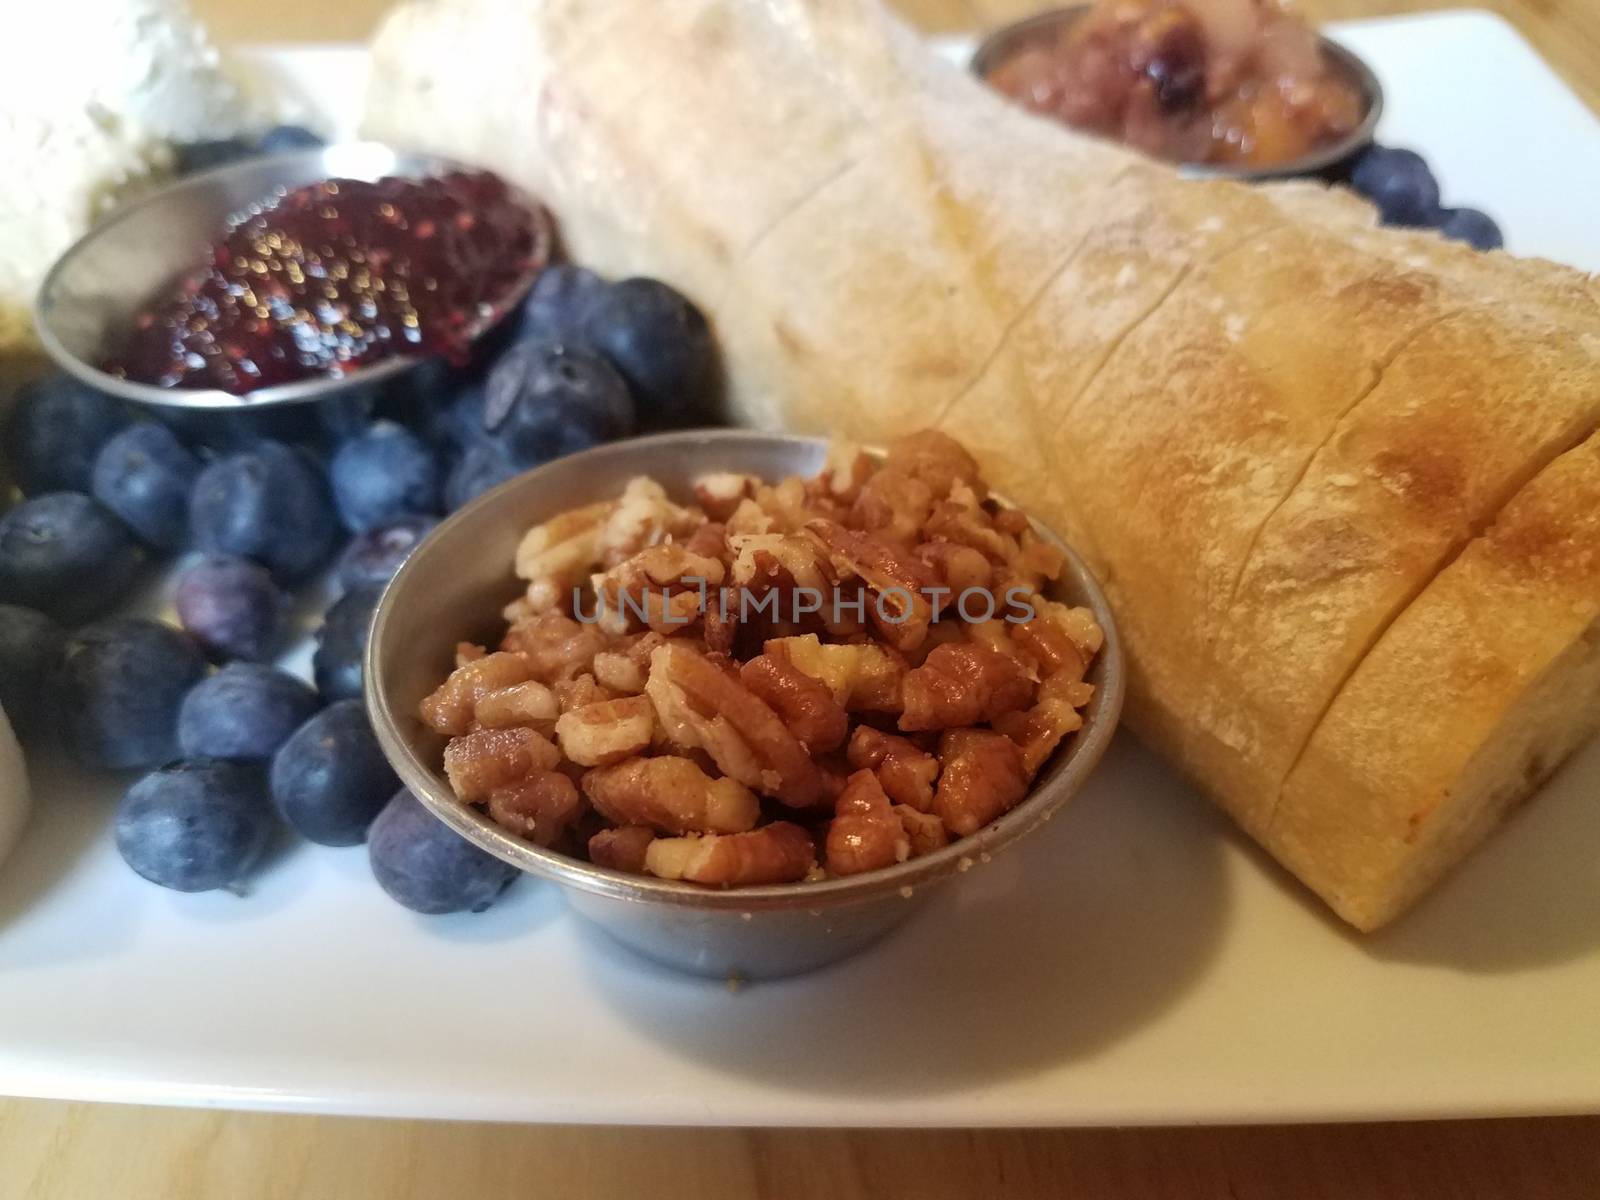 pecans and bread and blueberries on white plate by stockphotofan1